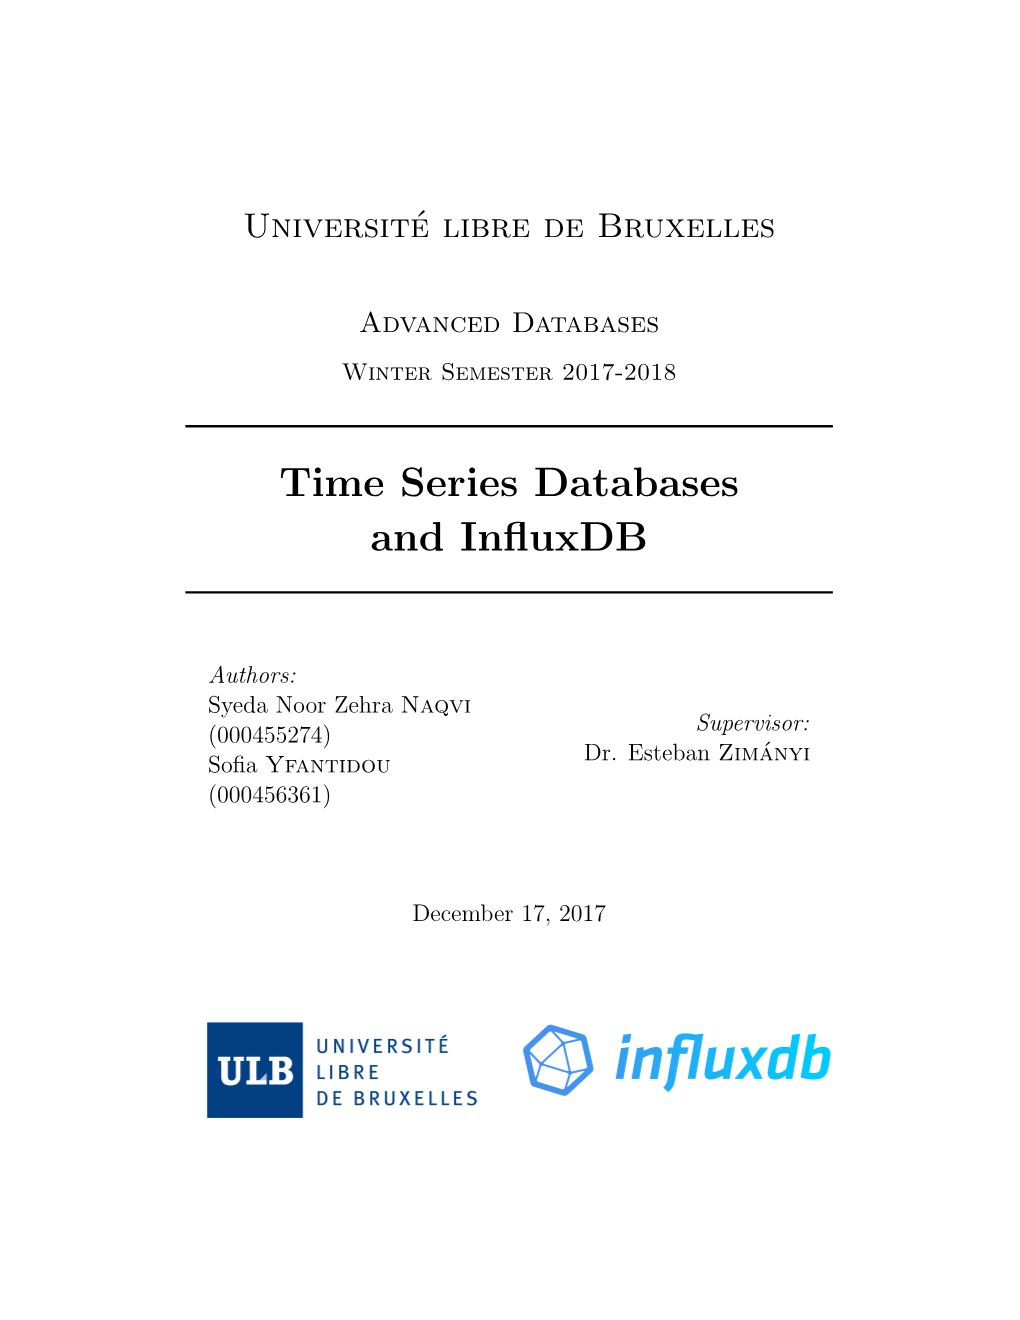 Time Series Databases and Influxdb